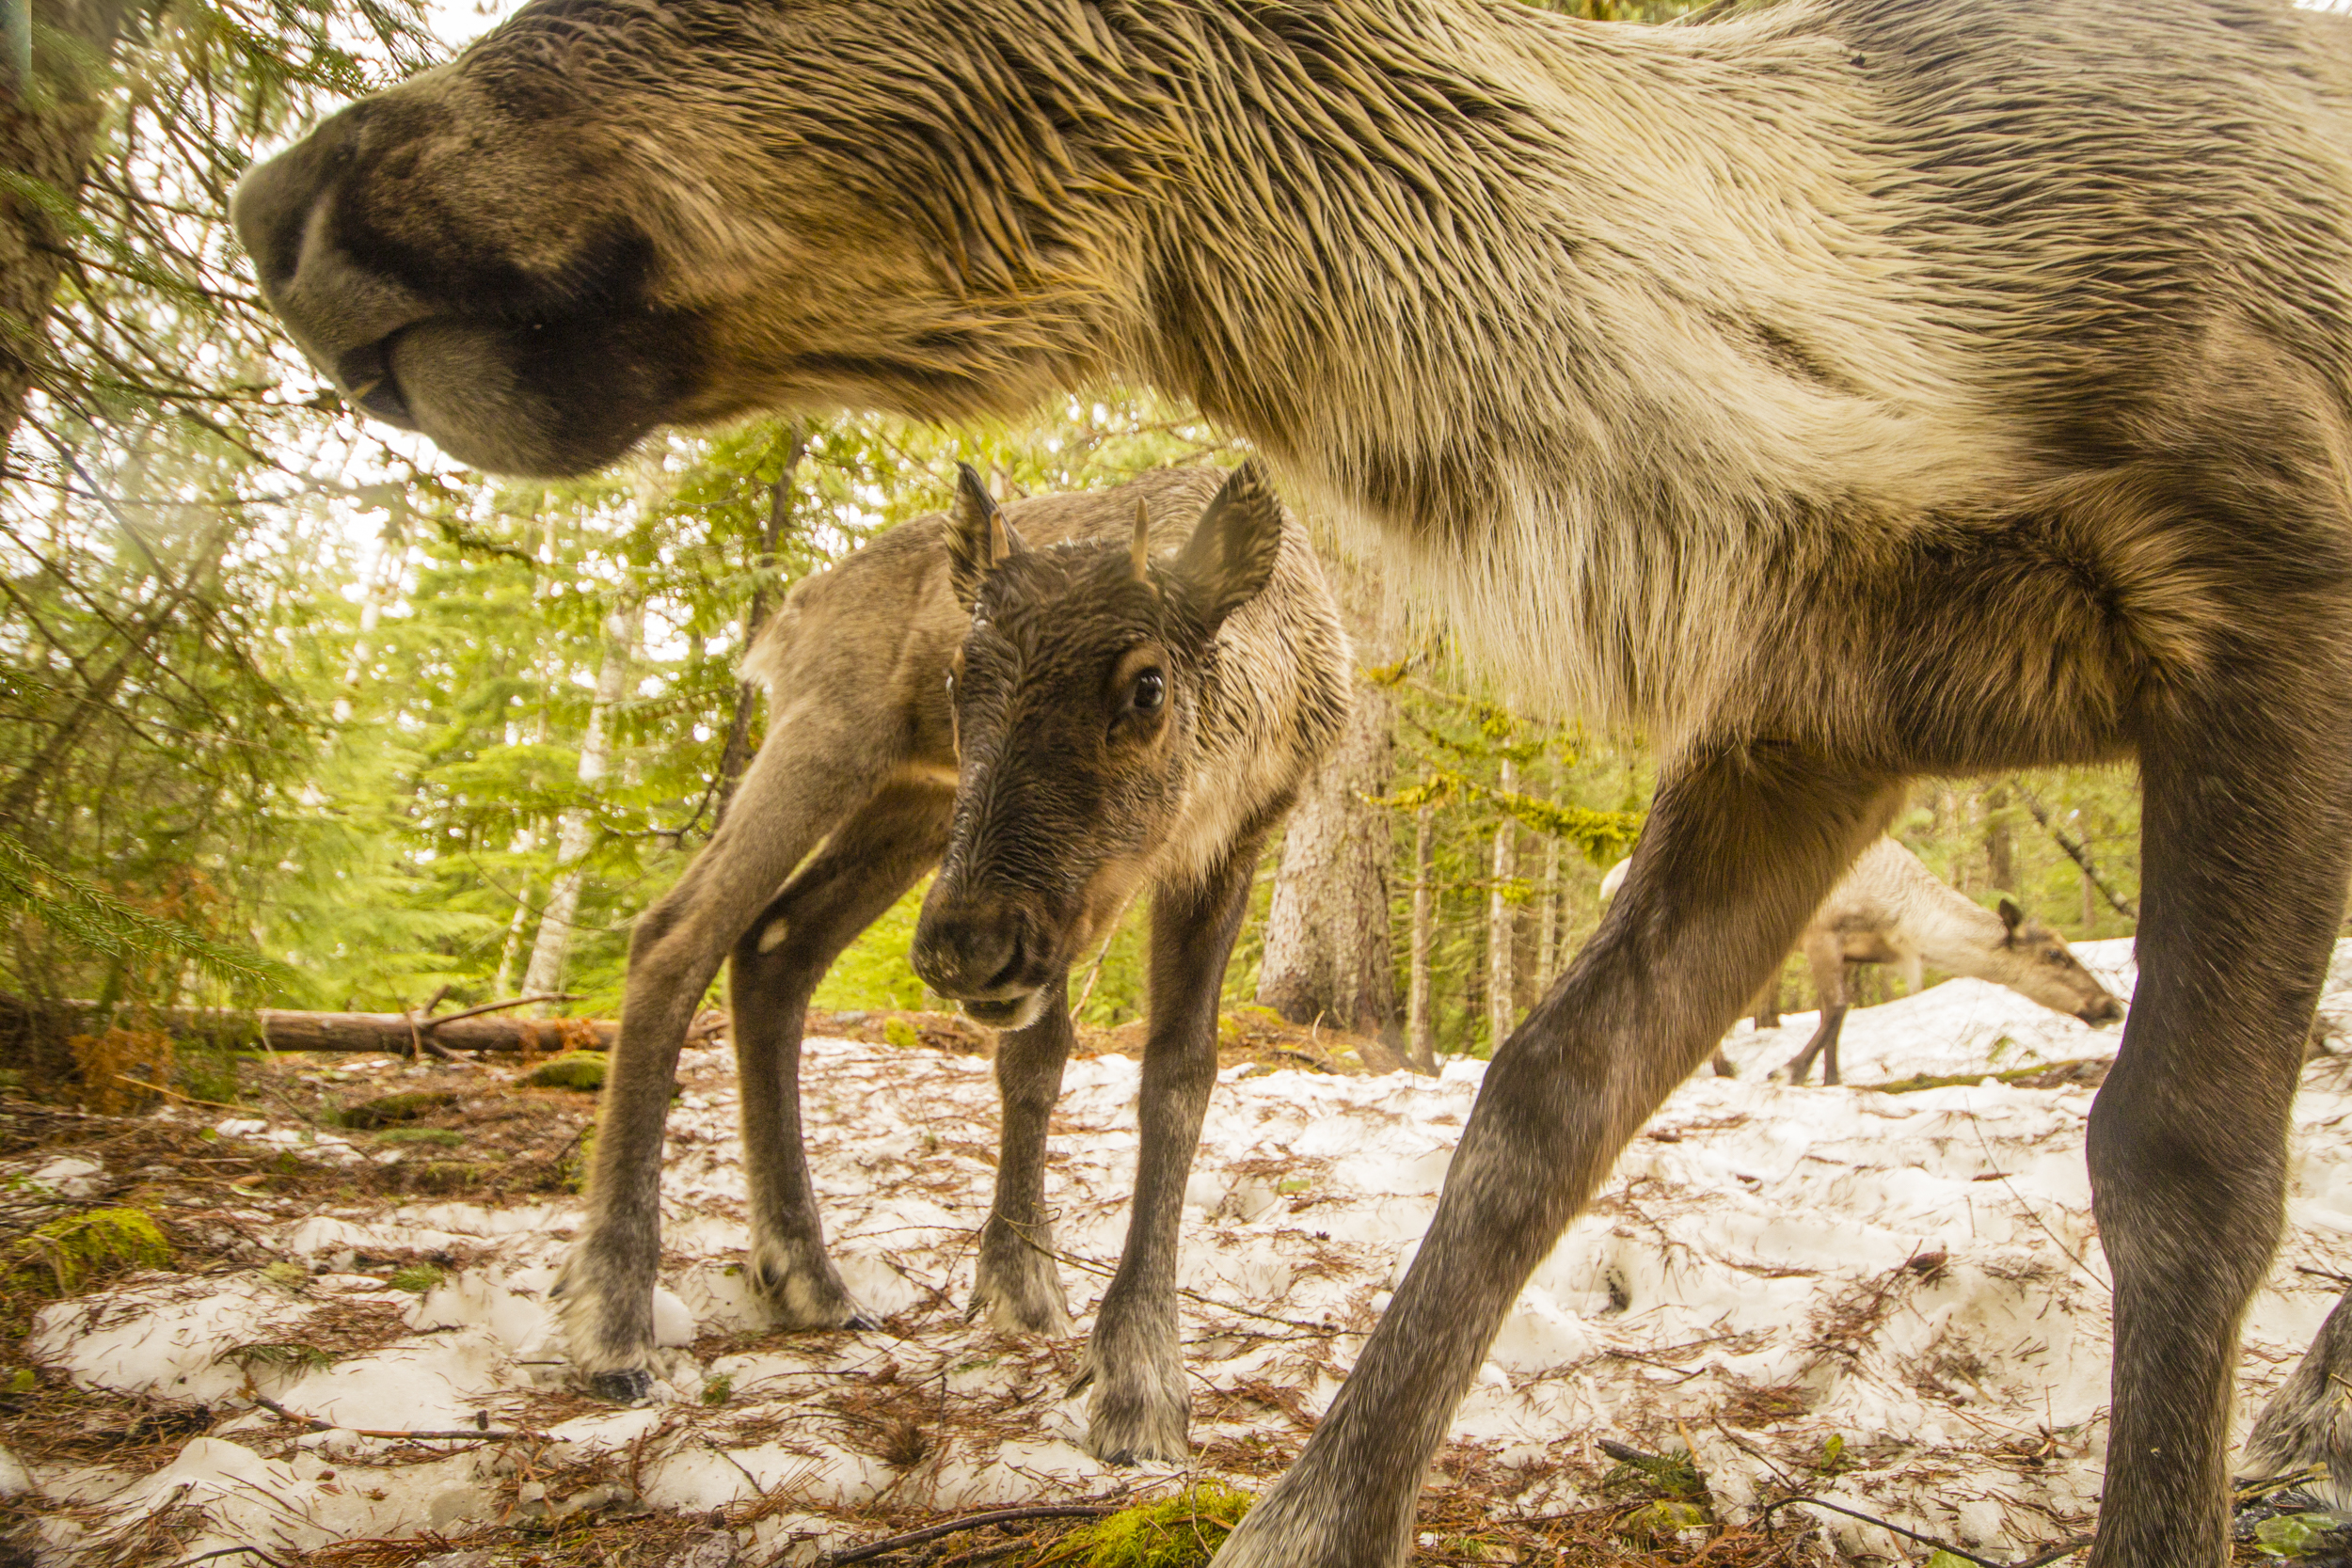 A baby caribou calf peeks under her mother and looks at the camera